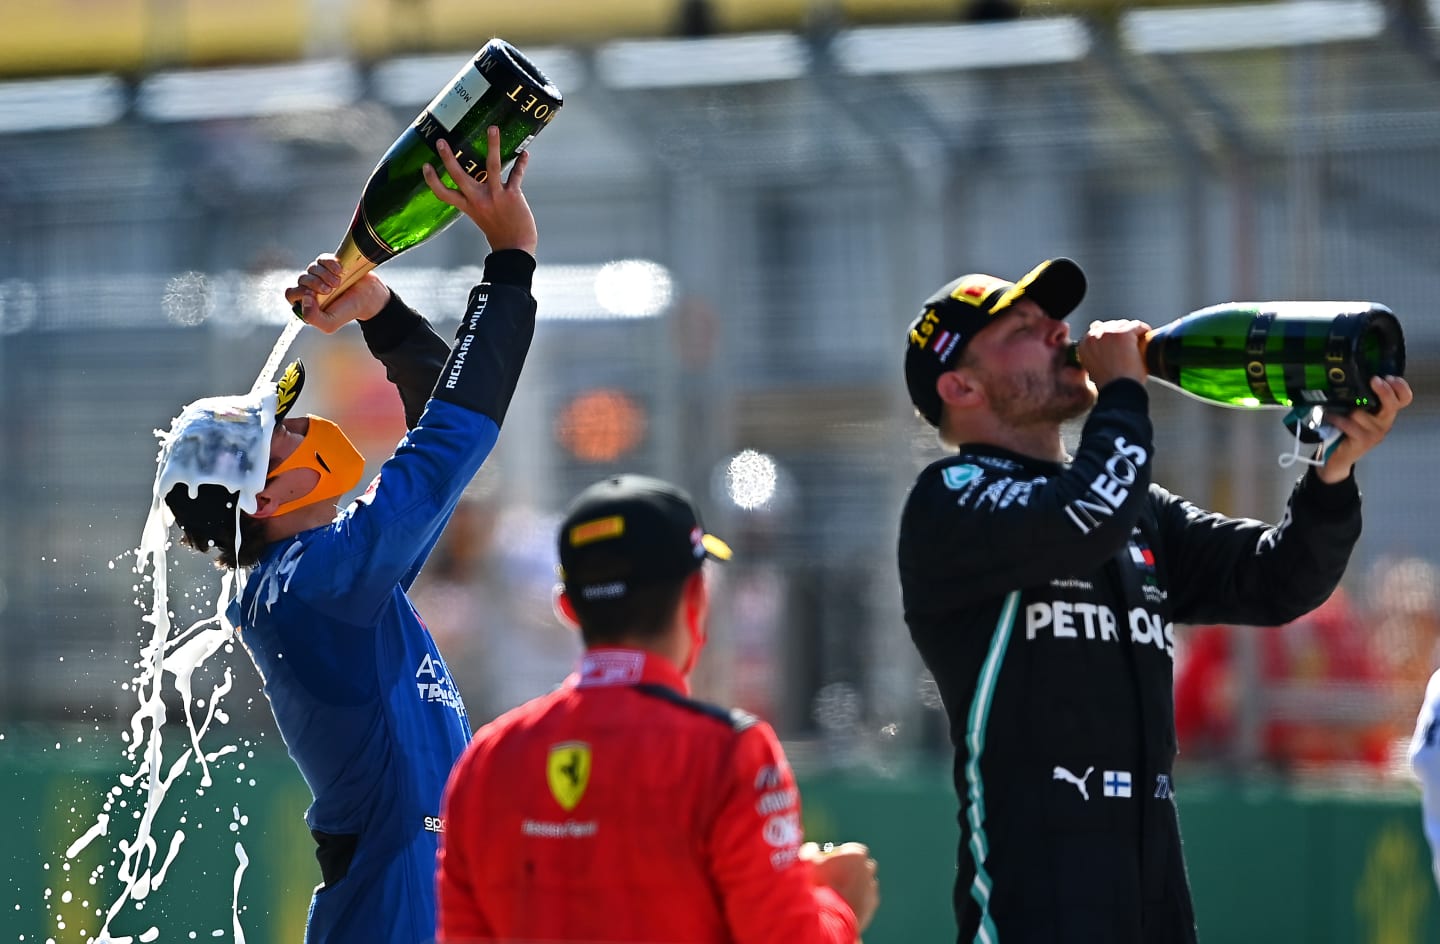 SPIELBERG, AUSTRIA - JULY 05: Third placed Lando Norris of Great Britain and McLaren F1 celebrates on the podium during the Formula One Grand Prix of Austria at Red Bull Ring on July 05, 2020 in Spielberg, Austria. (Photo by Clive Mason - Formula 1/Formula 1 via Getty Images)